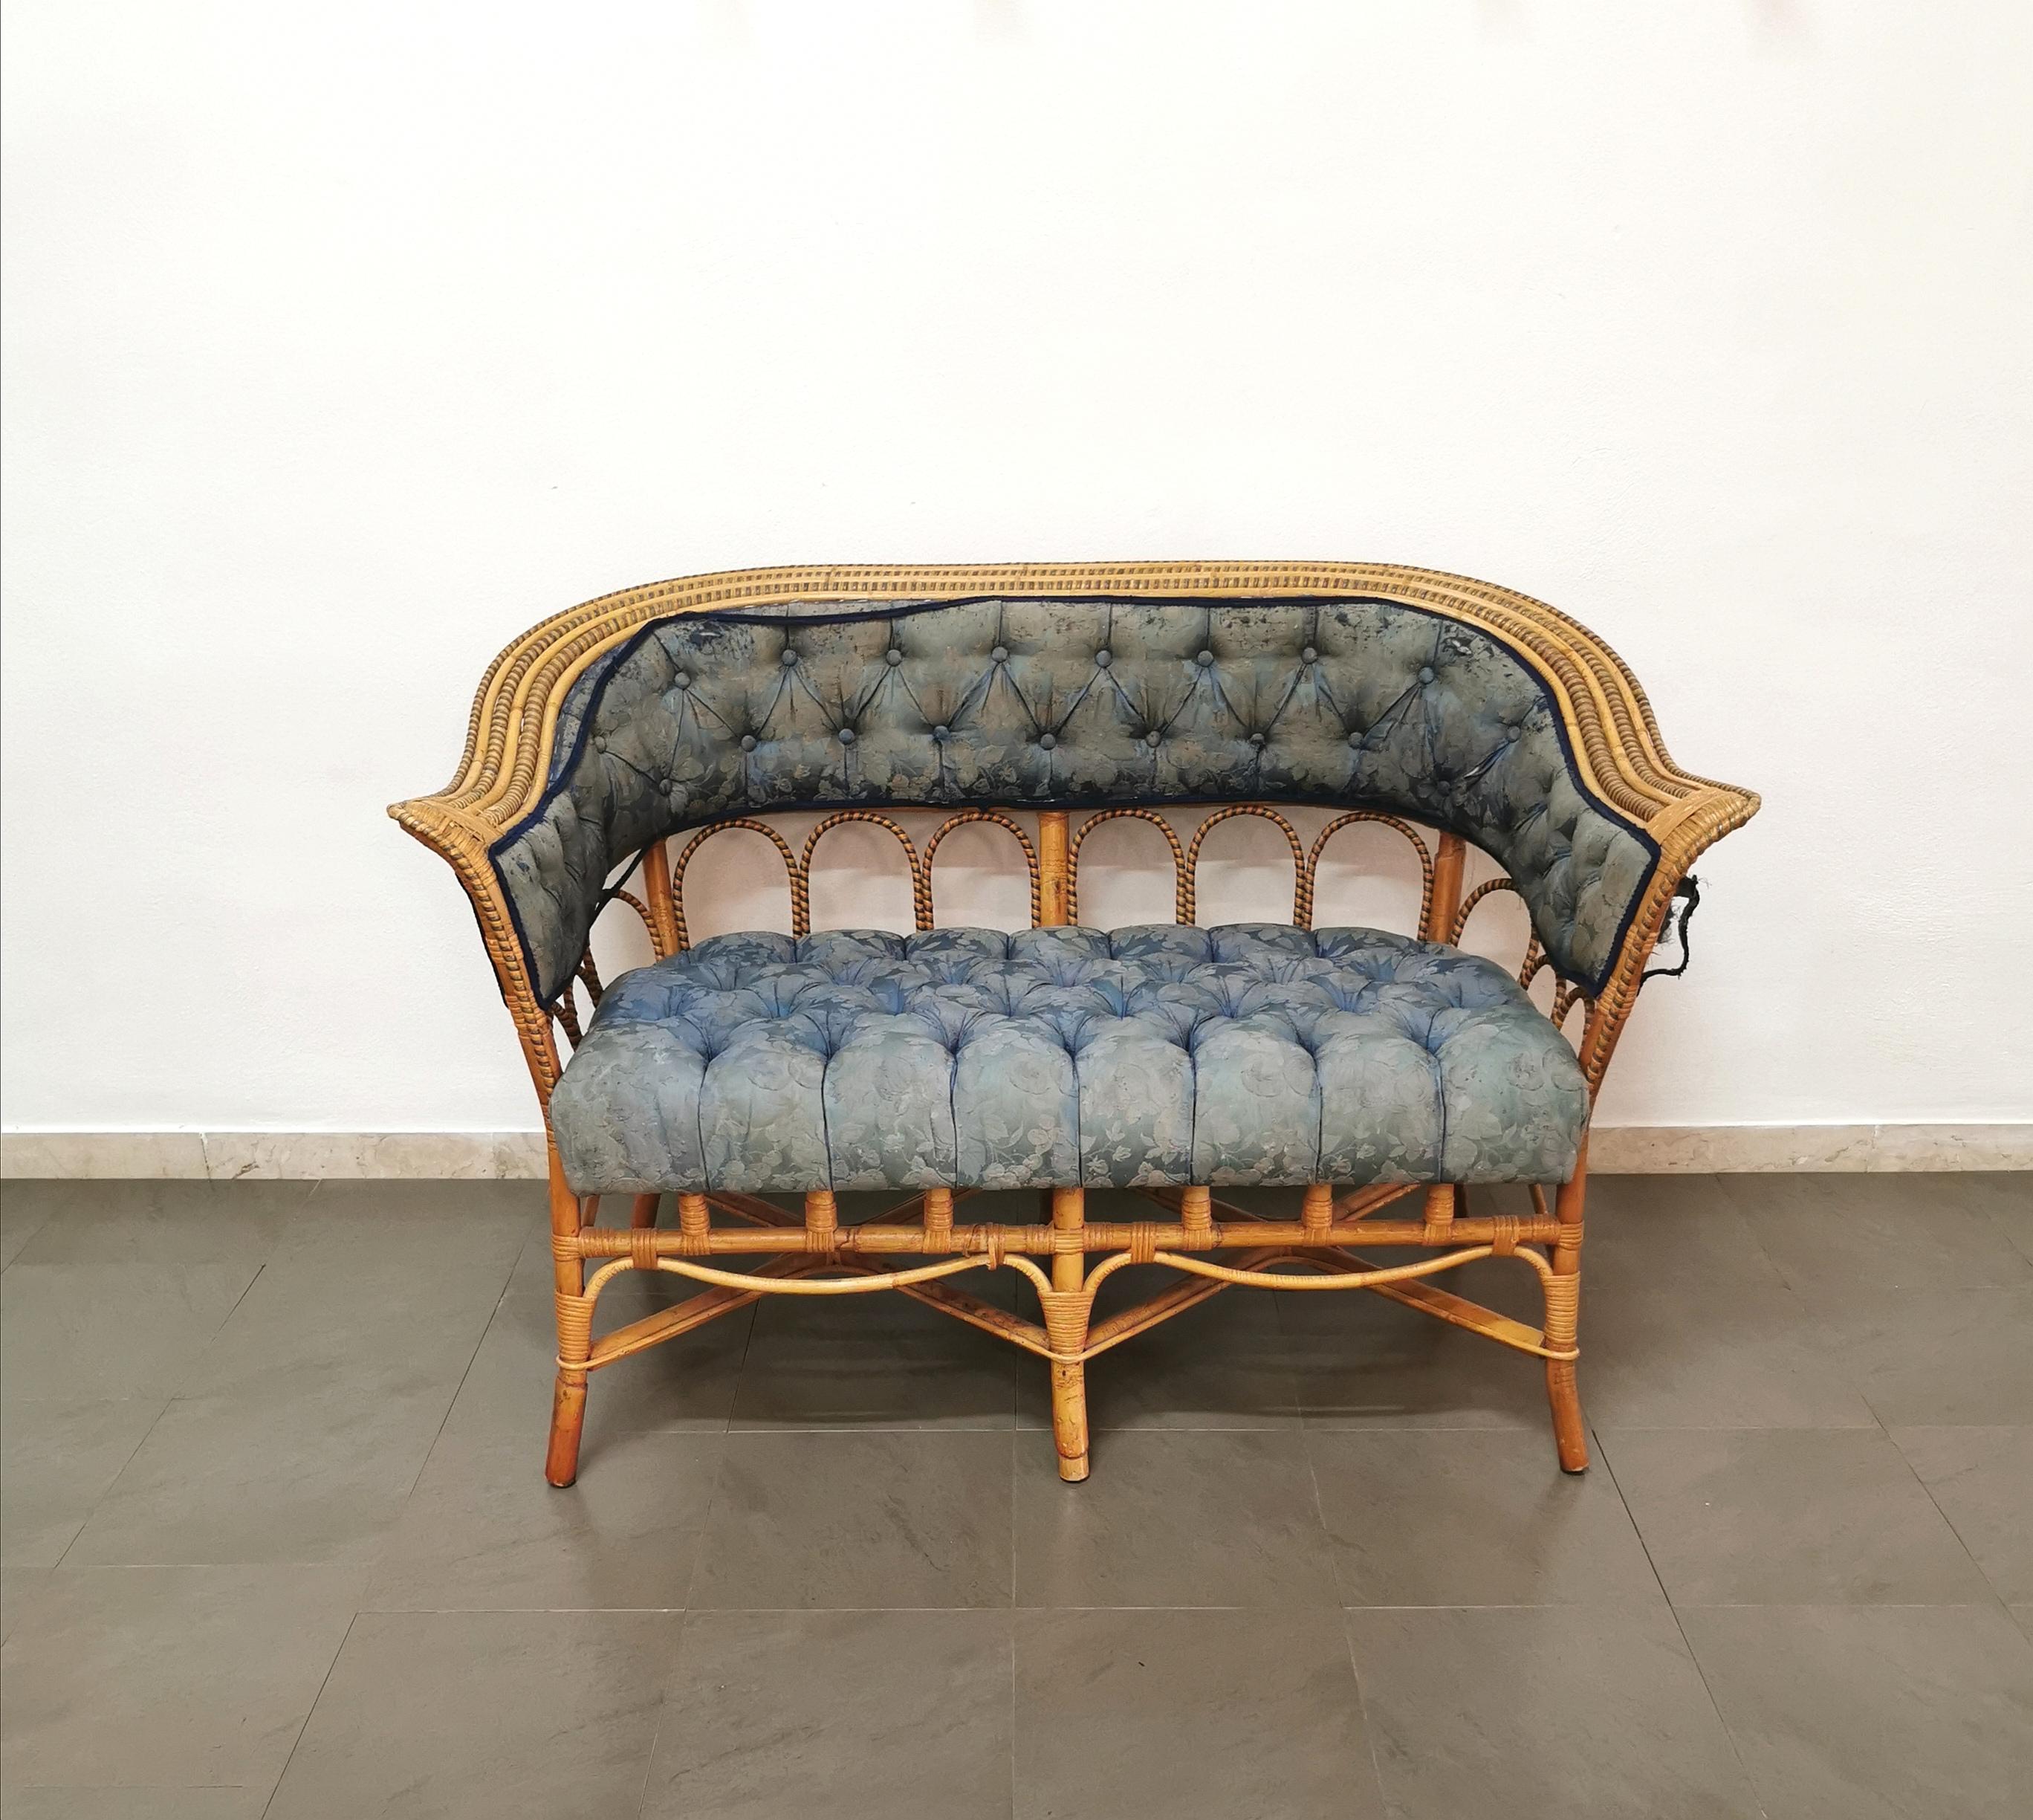 2 Seater sofa for living room or garden with curvilinear shapes produced in Italy in the 70s by Vivai del sud. The sofa was made of bamboo and rattan, with green weaves and with a seat and back in damask fabric with a floral pattern in shades of